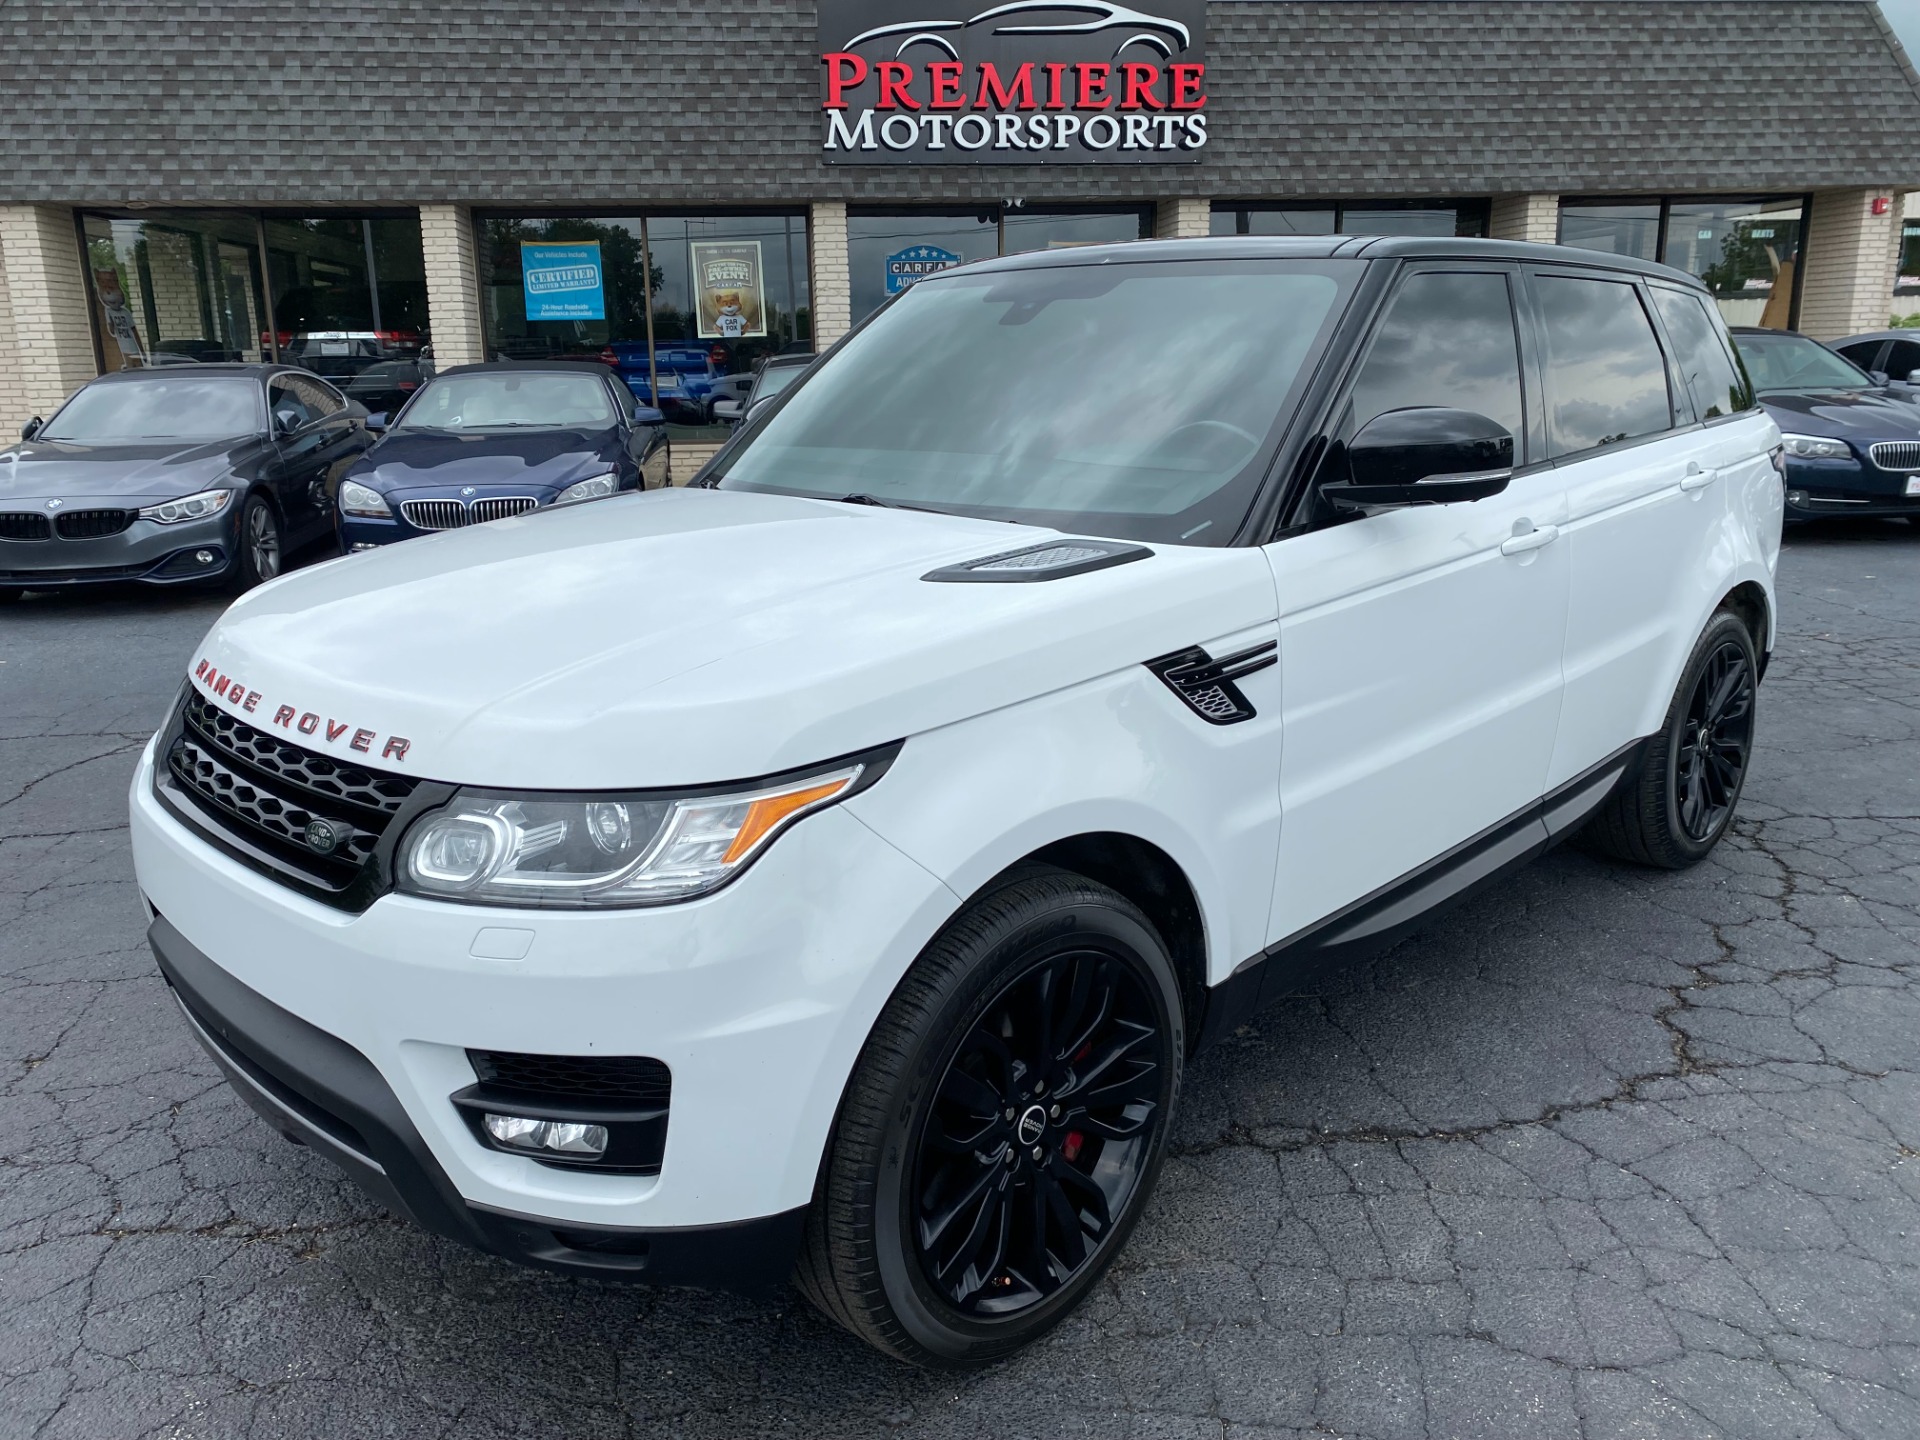 Achtervolging Hub Huisje Used 2016 Land Rover Range Rover Sport Supercharged Dynamic For Sale (Sold)  | Premiere Motorsports Stock #PM4756A